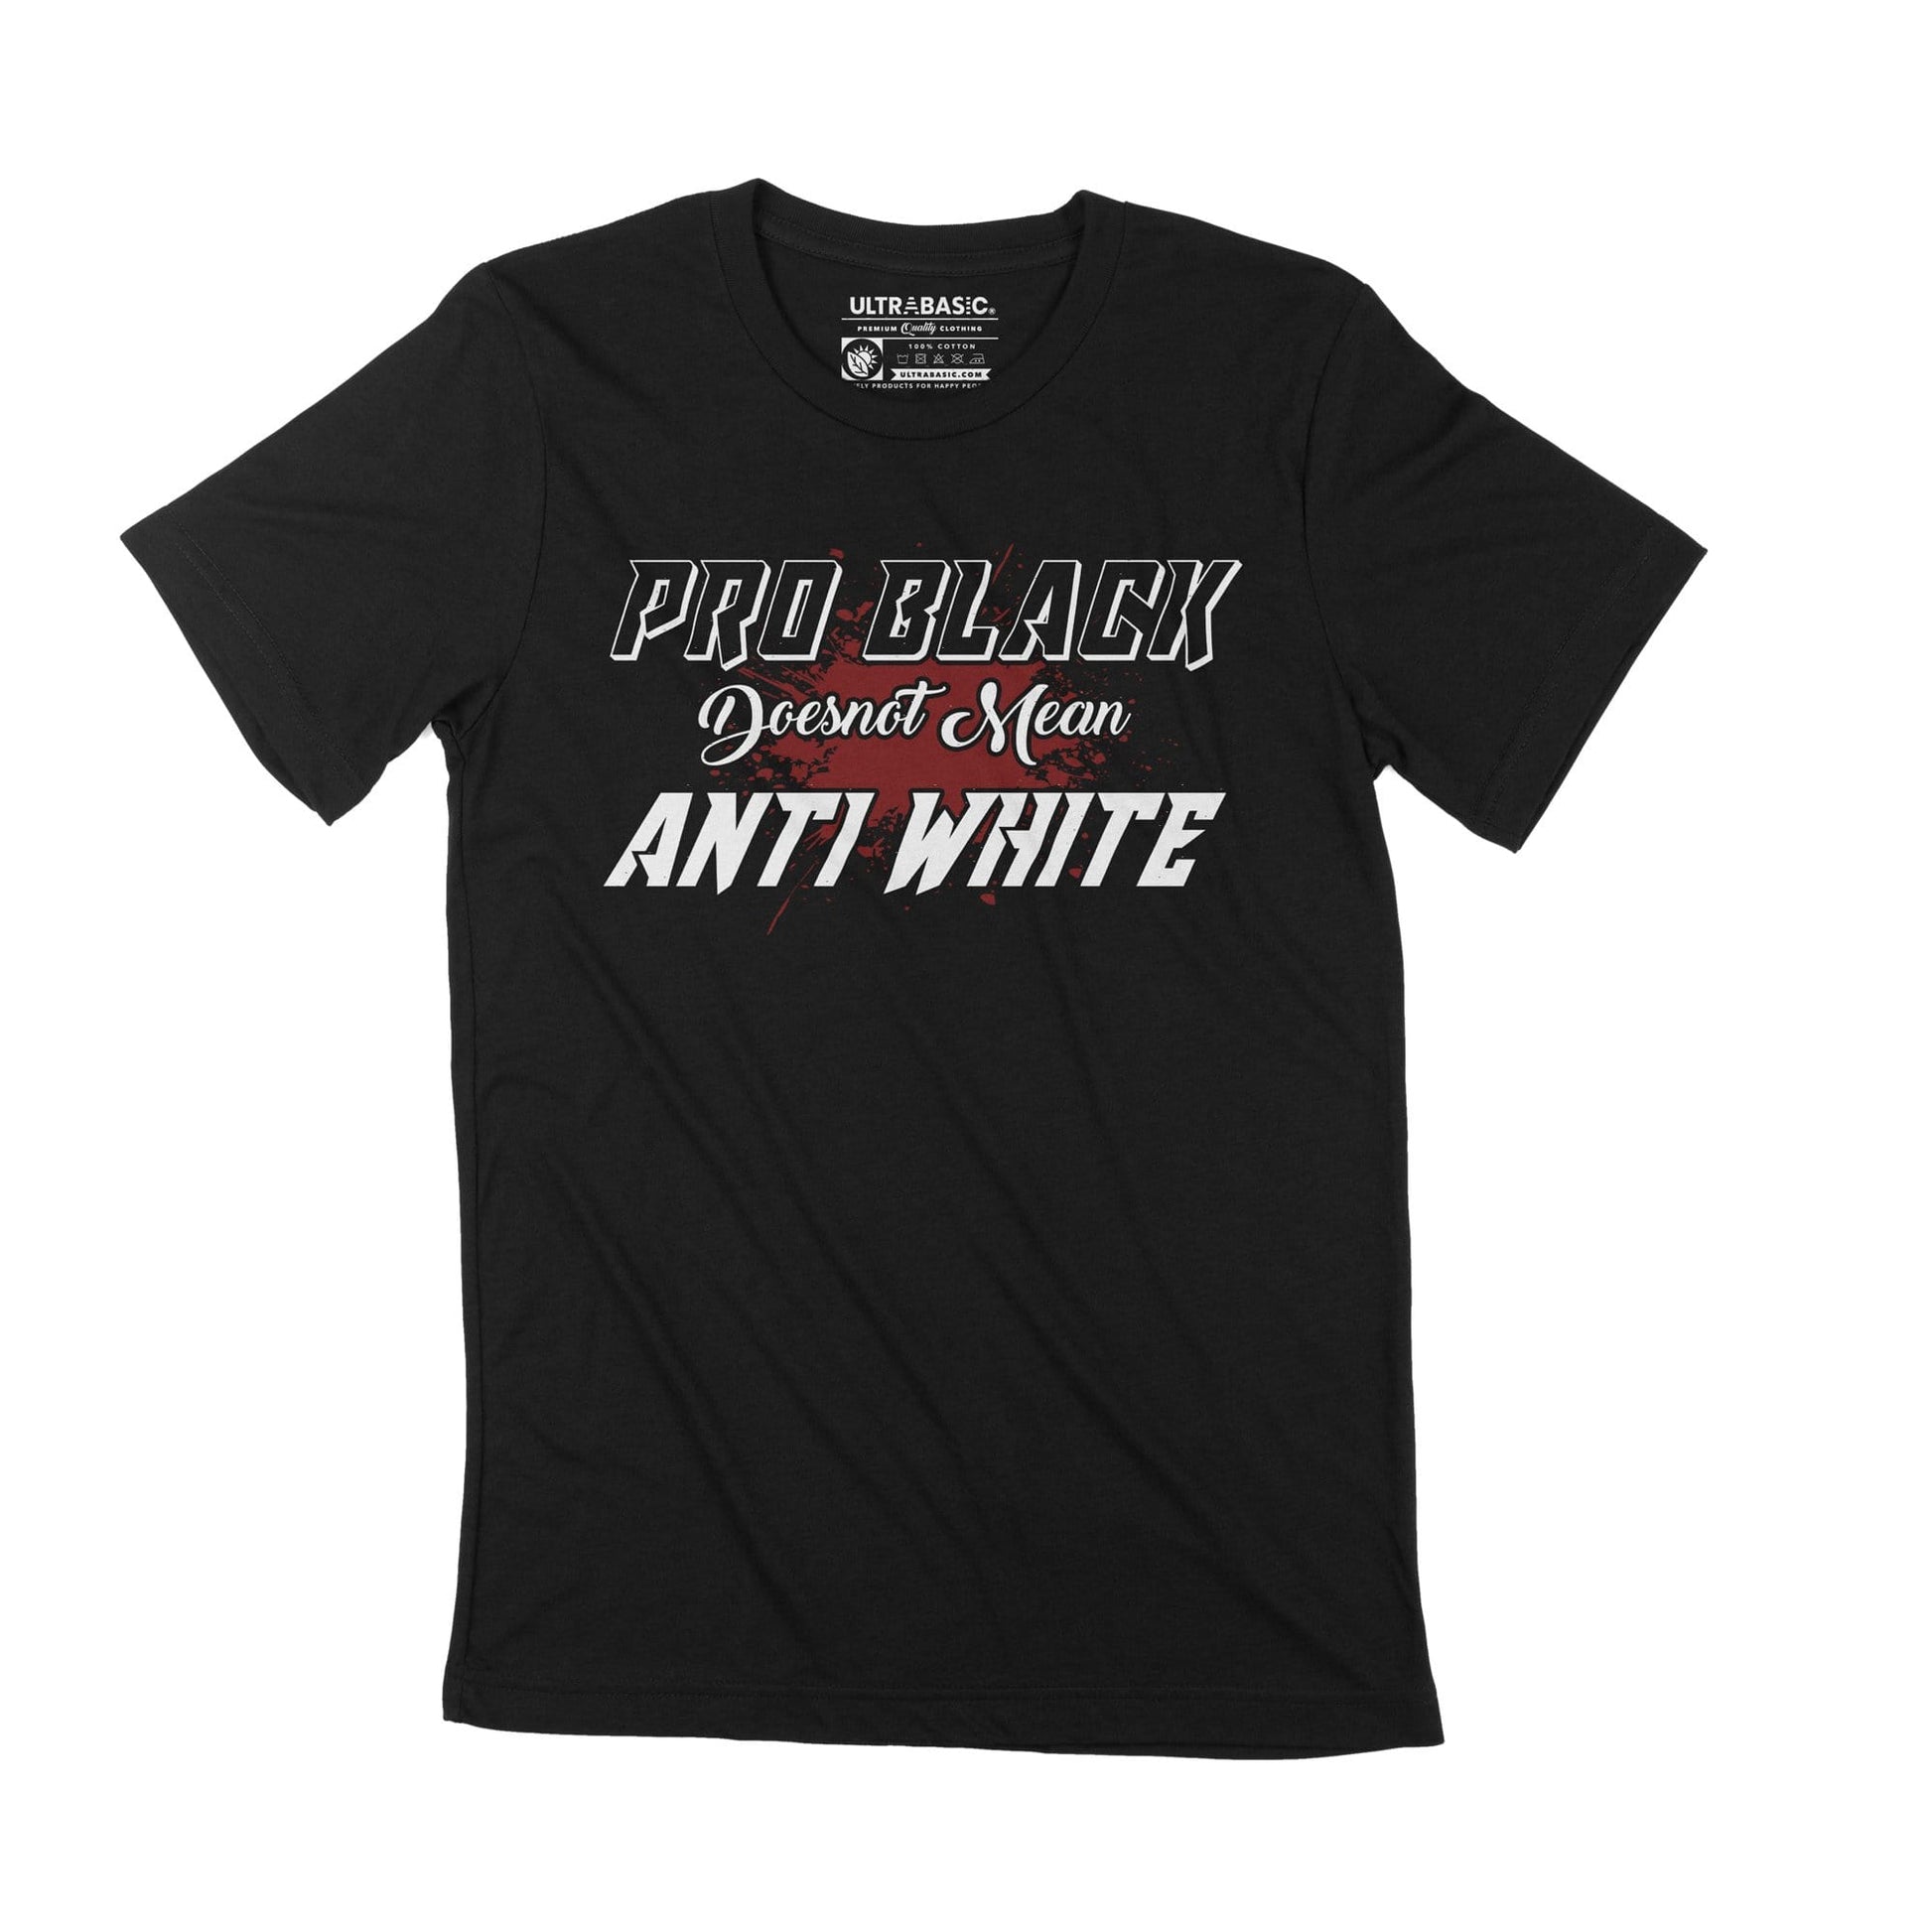 george floyd i cant breathe tshirt blm revolution movement protest shirt love is love no hate tees support kindness respect us equal rights freedom empowerment equality no racism anti racist solidarity civil right say their names silence is violence 